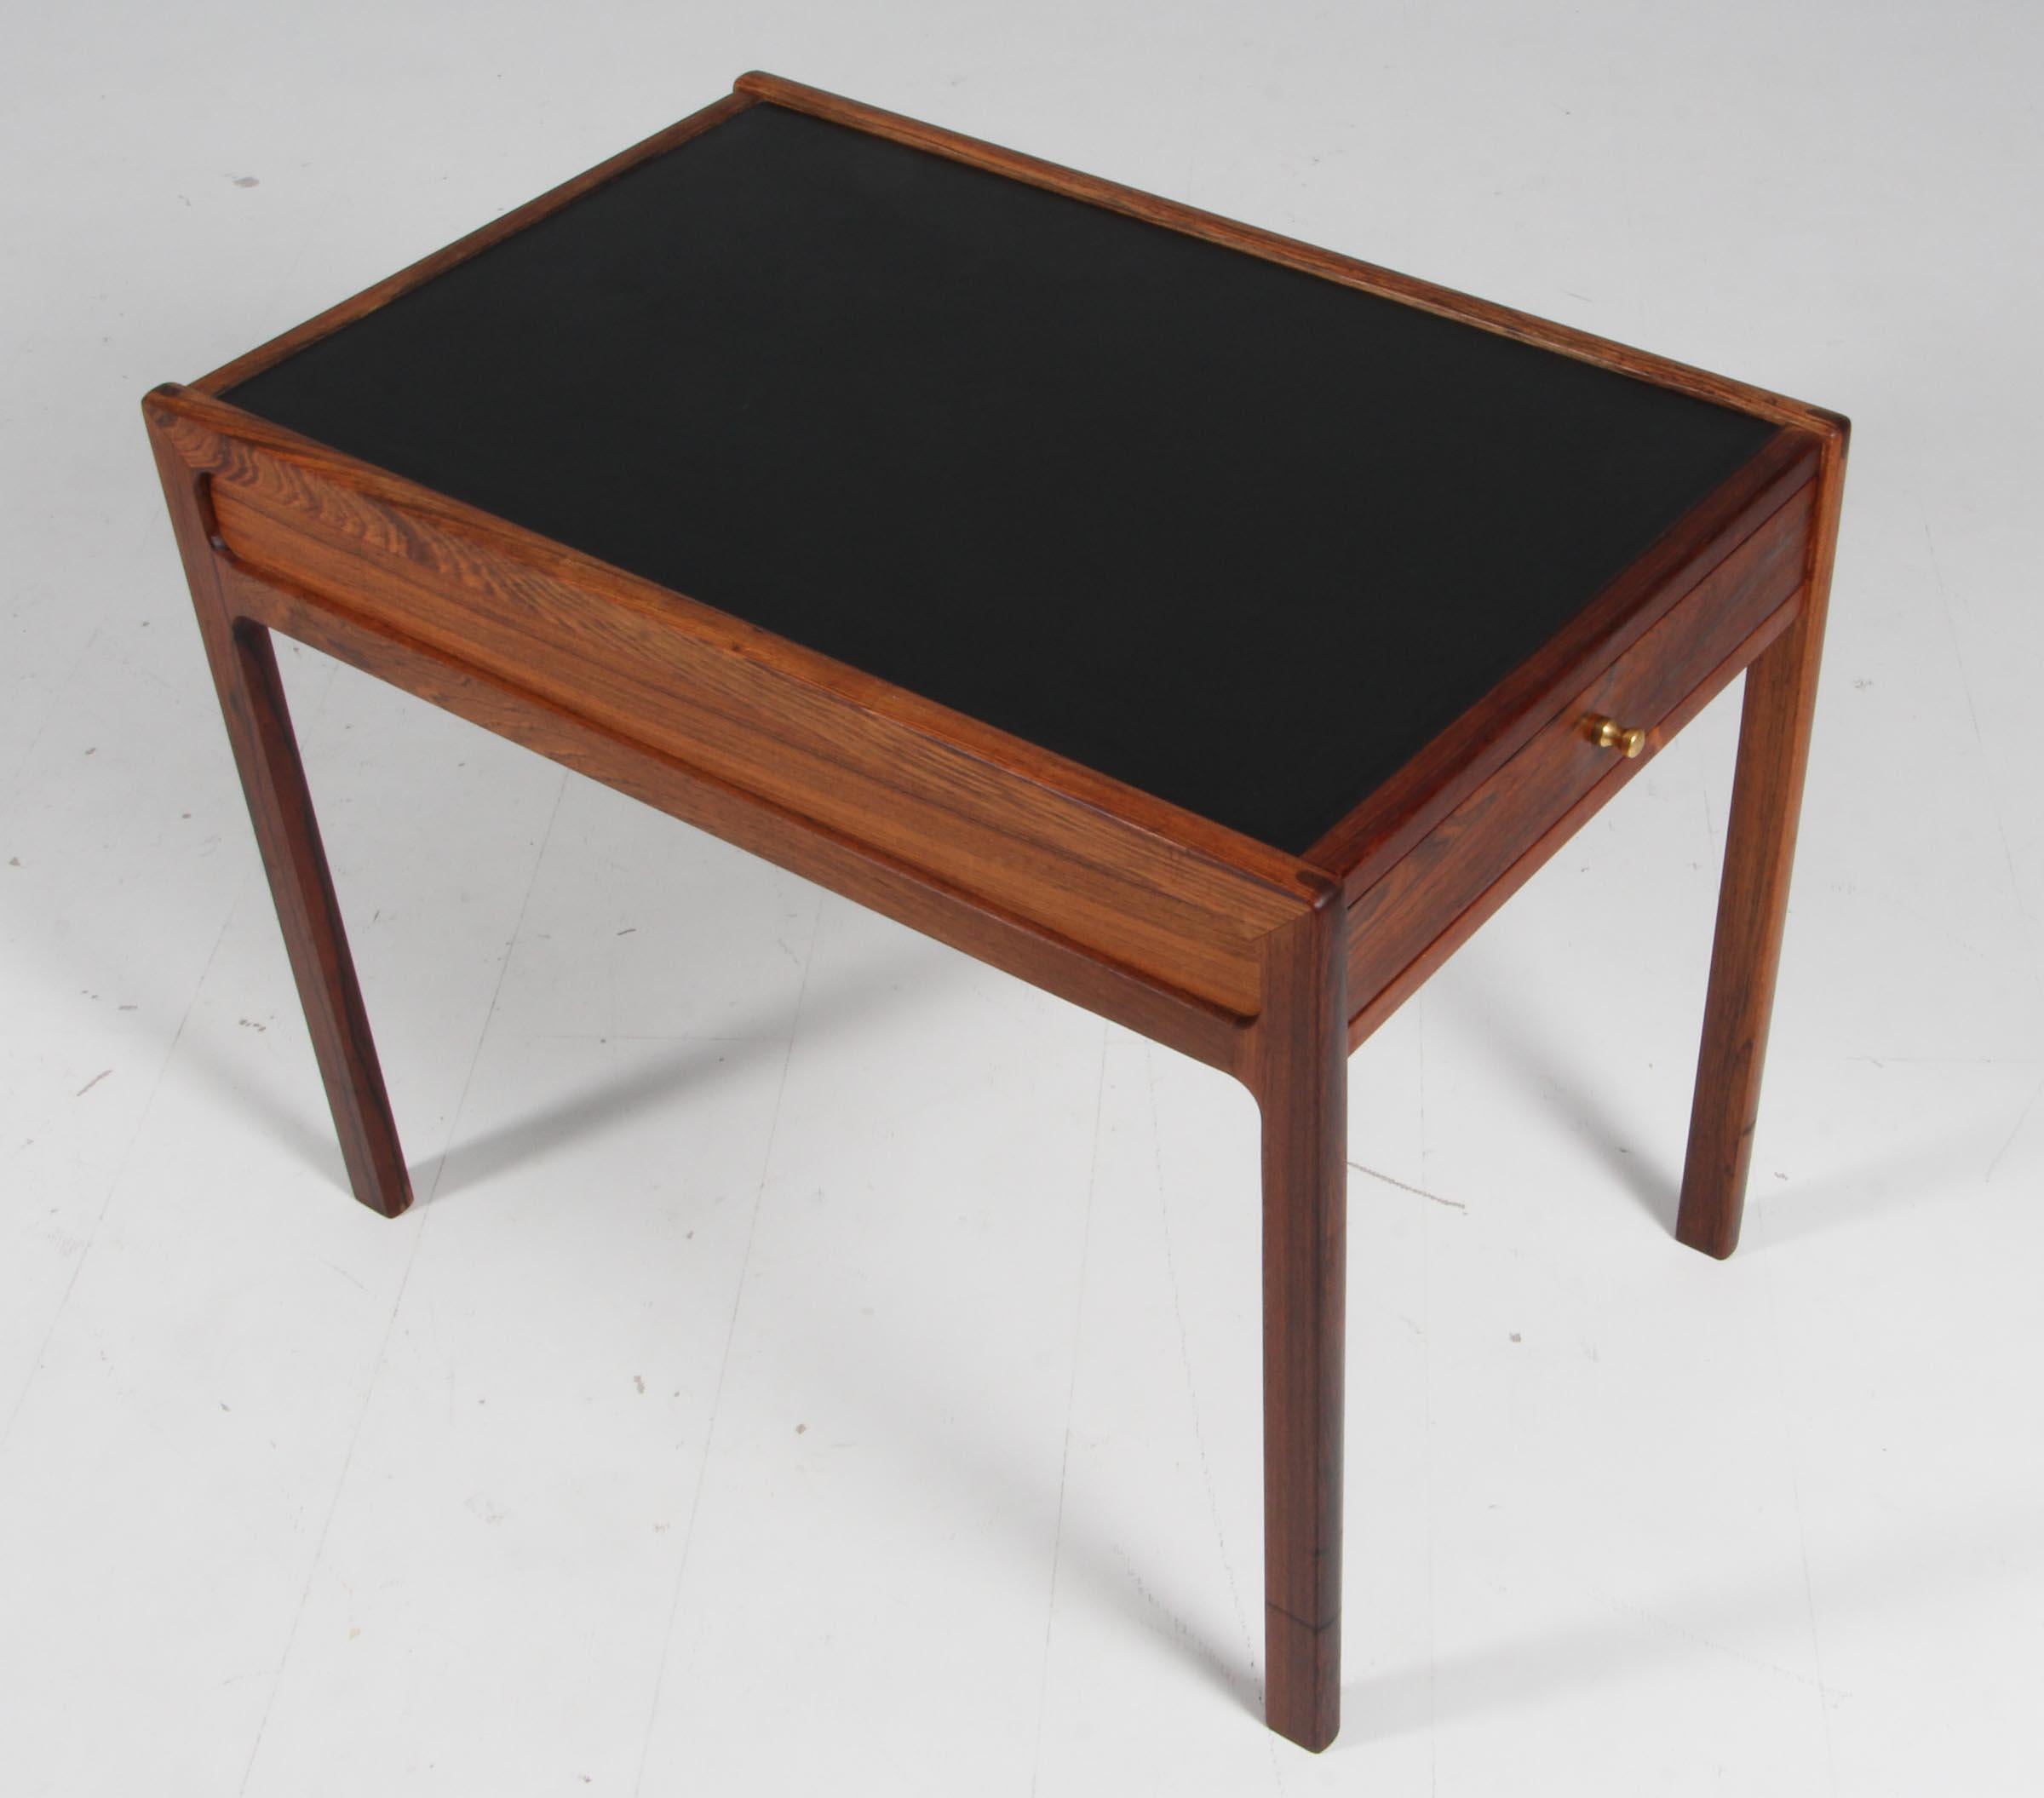 Hans Olsen coffee table / side table of rosewood and leather with drawers with brass handle.